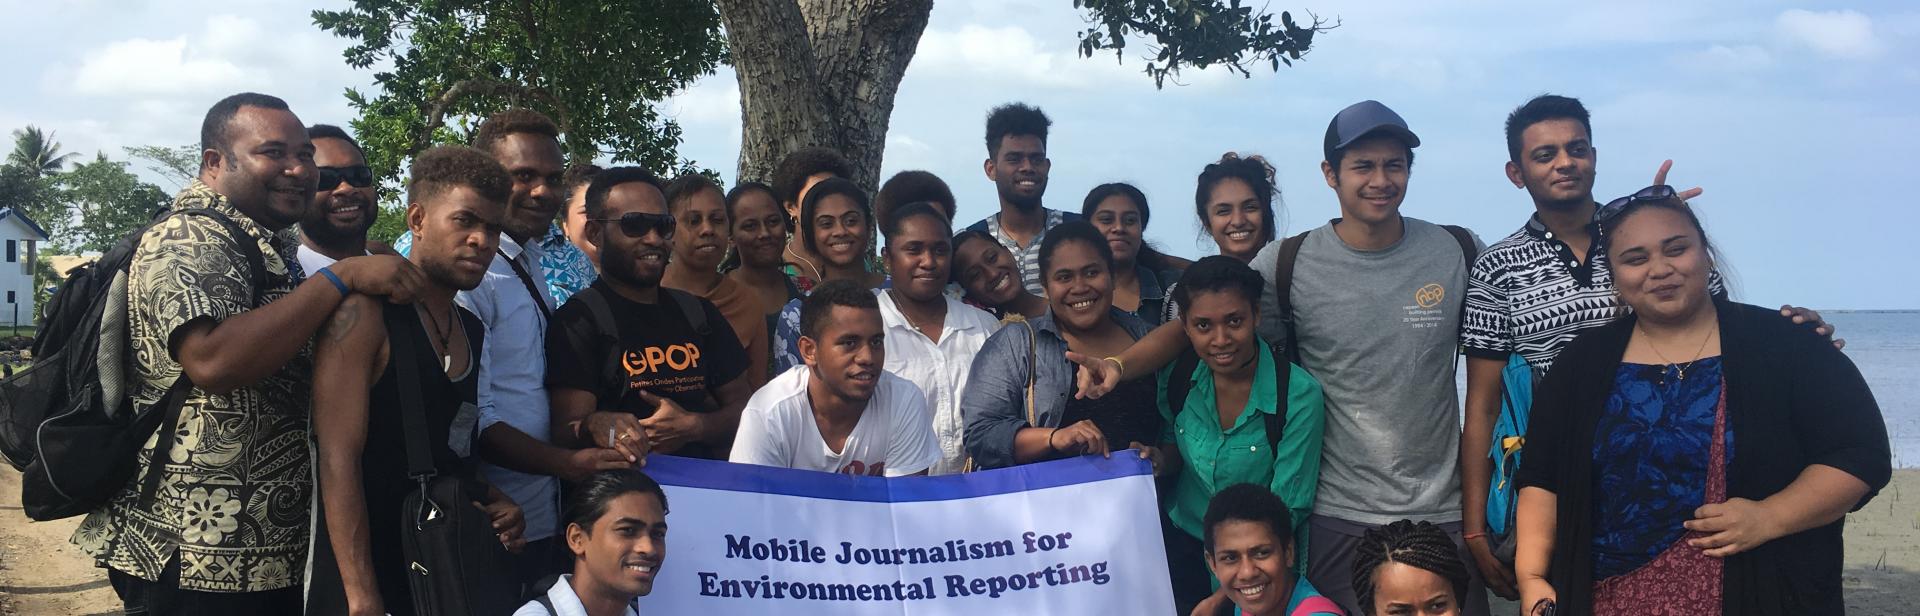 Mobile Journalism workshop for Environmental Reporting - students of the University of South pacific